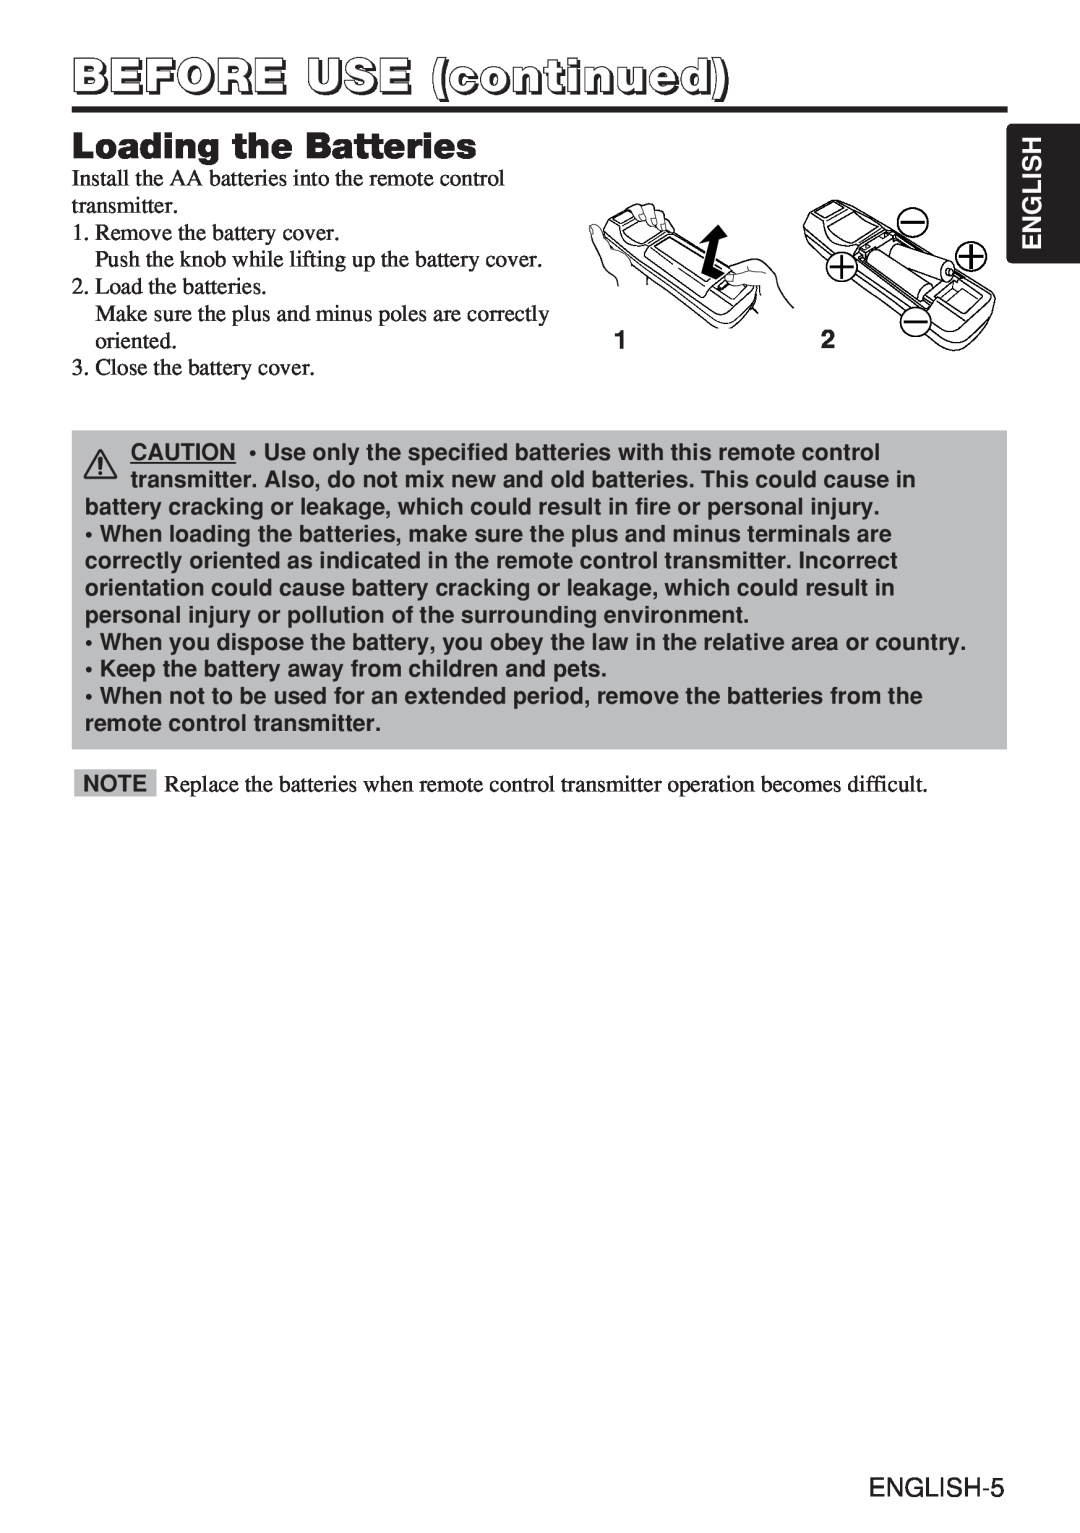 Hitachi CP-X985W user manual Loading the Batteries, BEFORE USE continued, English, ENGLISH-5 